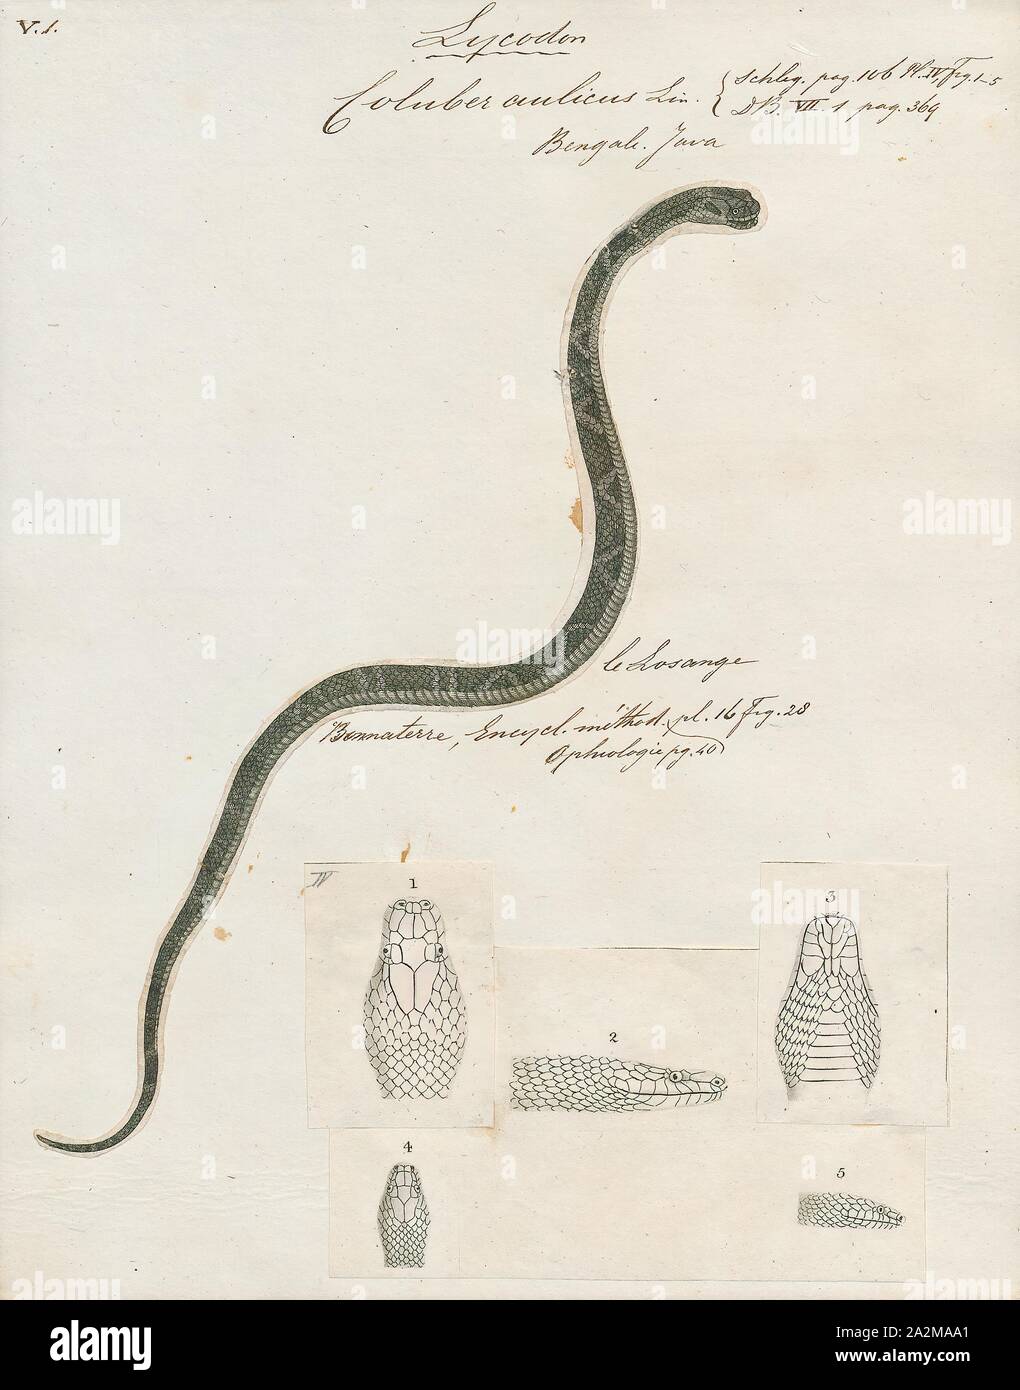 Coluber aulicus, Print, Lycodon aulicus, commonly known as the Indian wolf snake, is a species of nonvenomous snake found in South Asia and Southeast Asia. Early naturalists have suggested its resemblance to the venomous common krait as an instance of Batesian mimicry., 1700-1880 Stock Photo